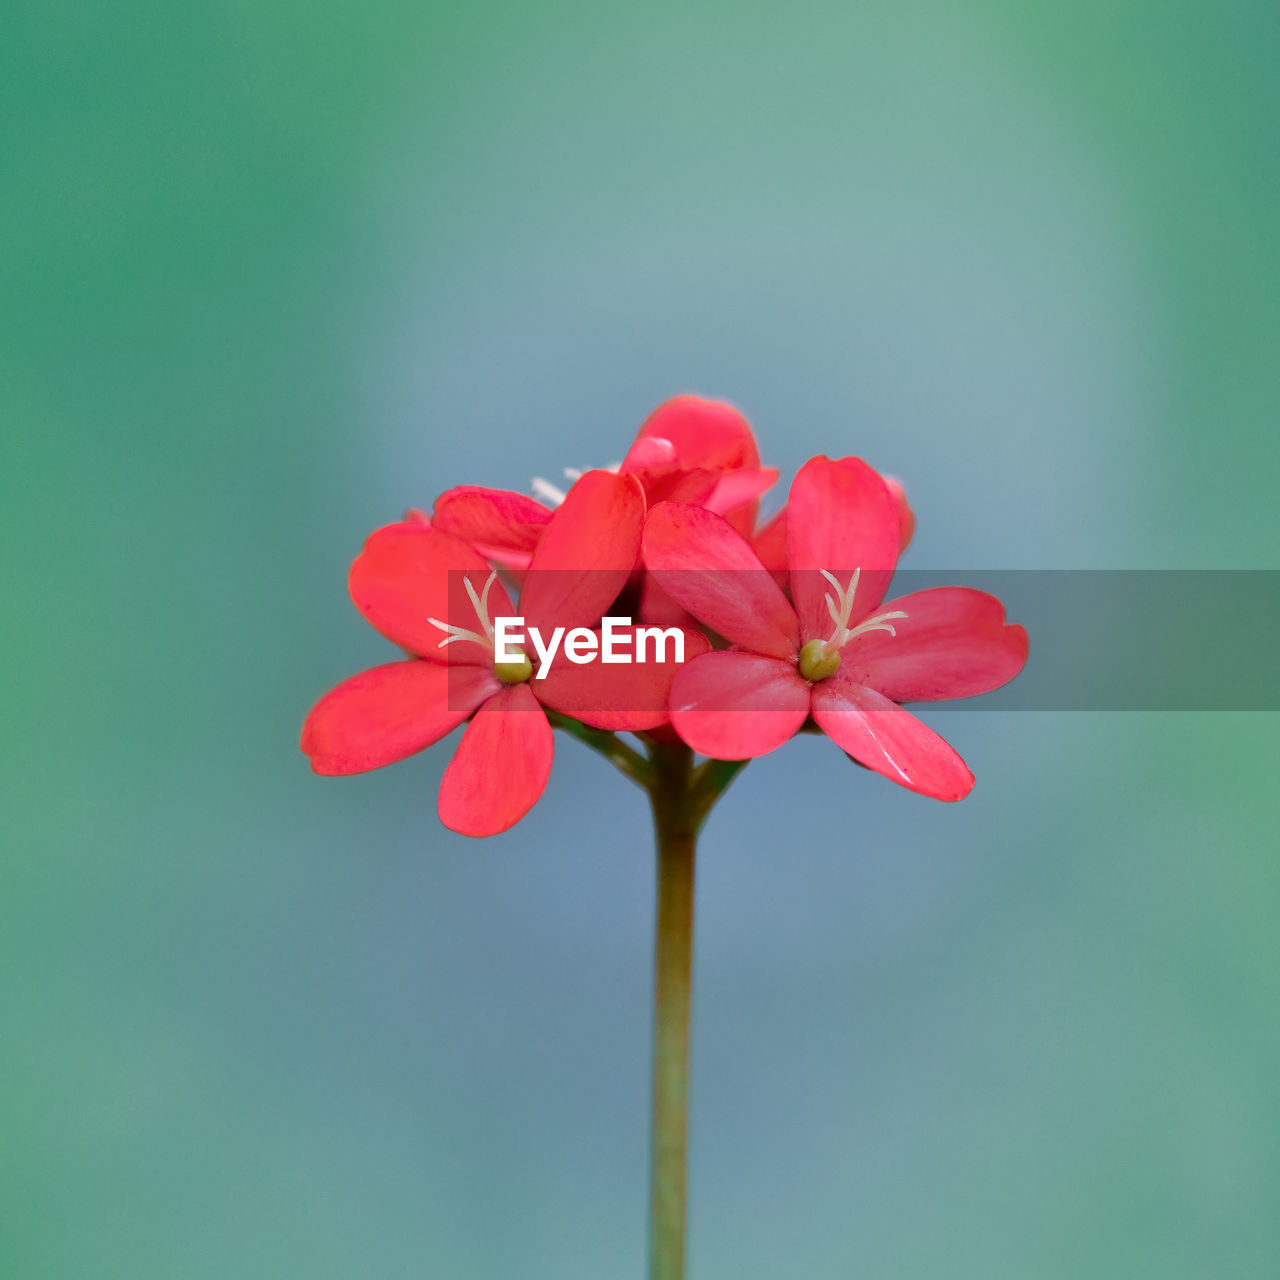 CLOSE-UP OF PINK FLOWERING PLANT AGAINST RED BACKGROUND